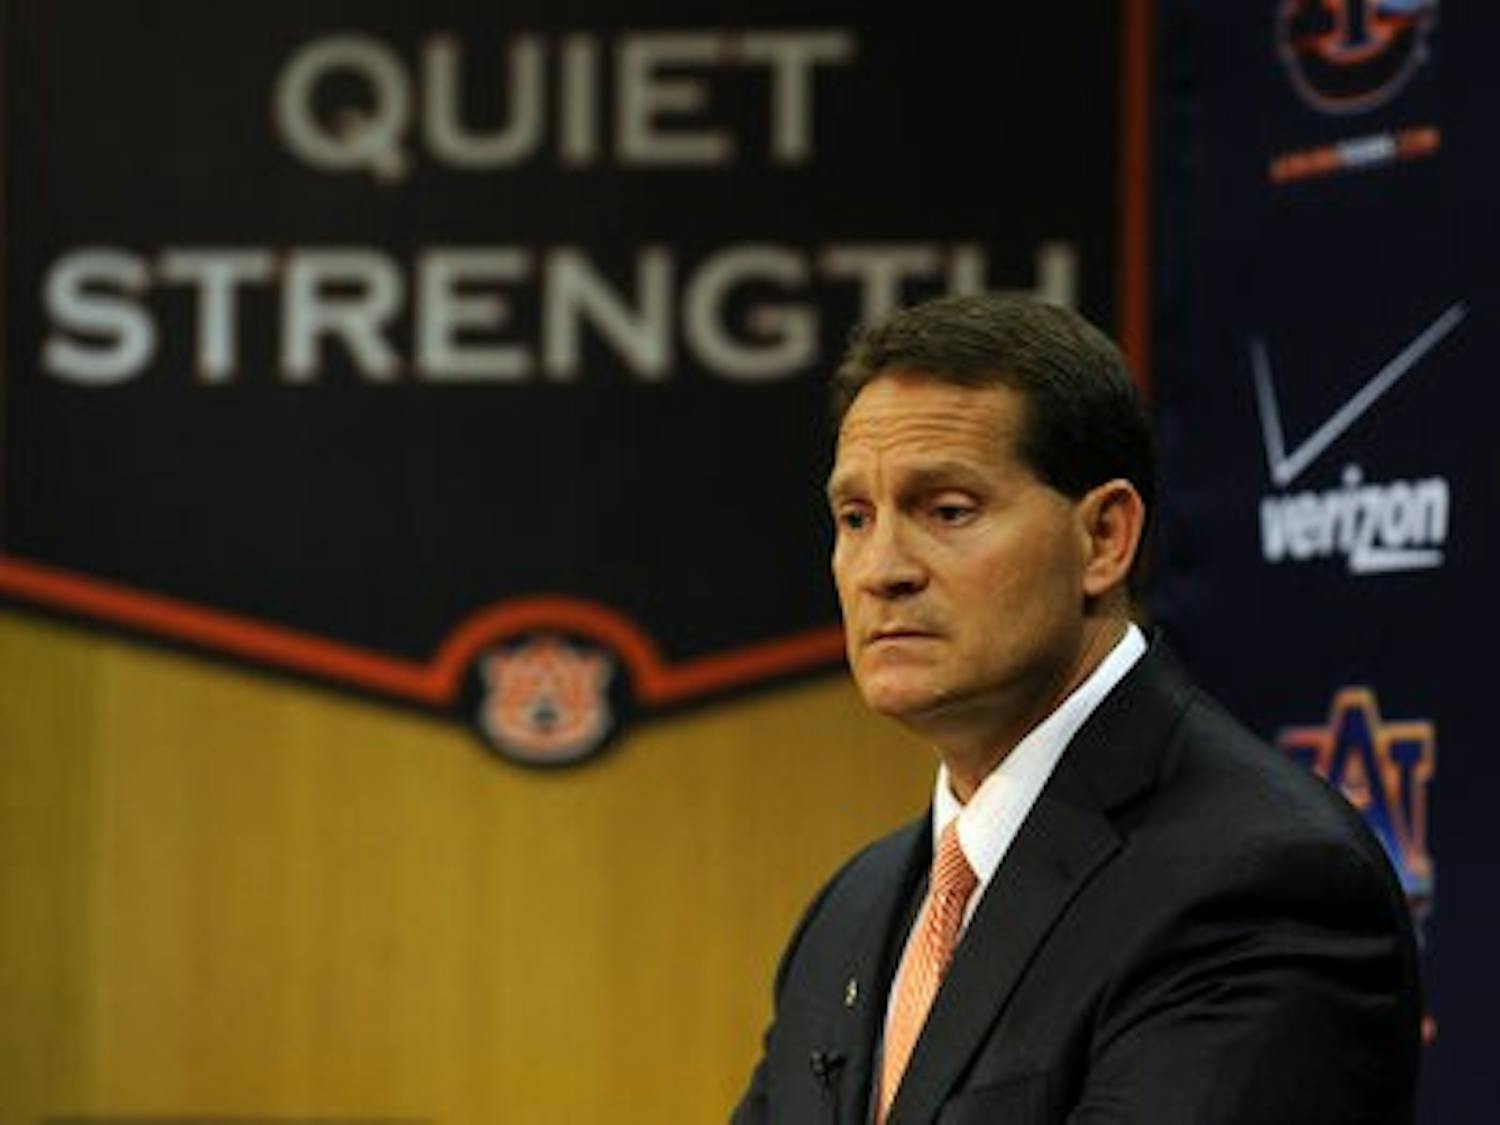 Gene Chizik said he is doing "whatever I can" for the victims and their families.